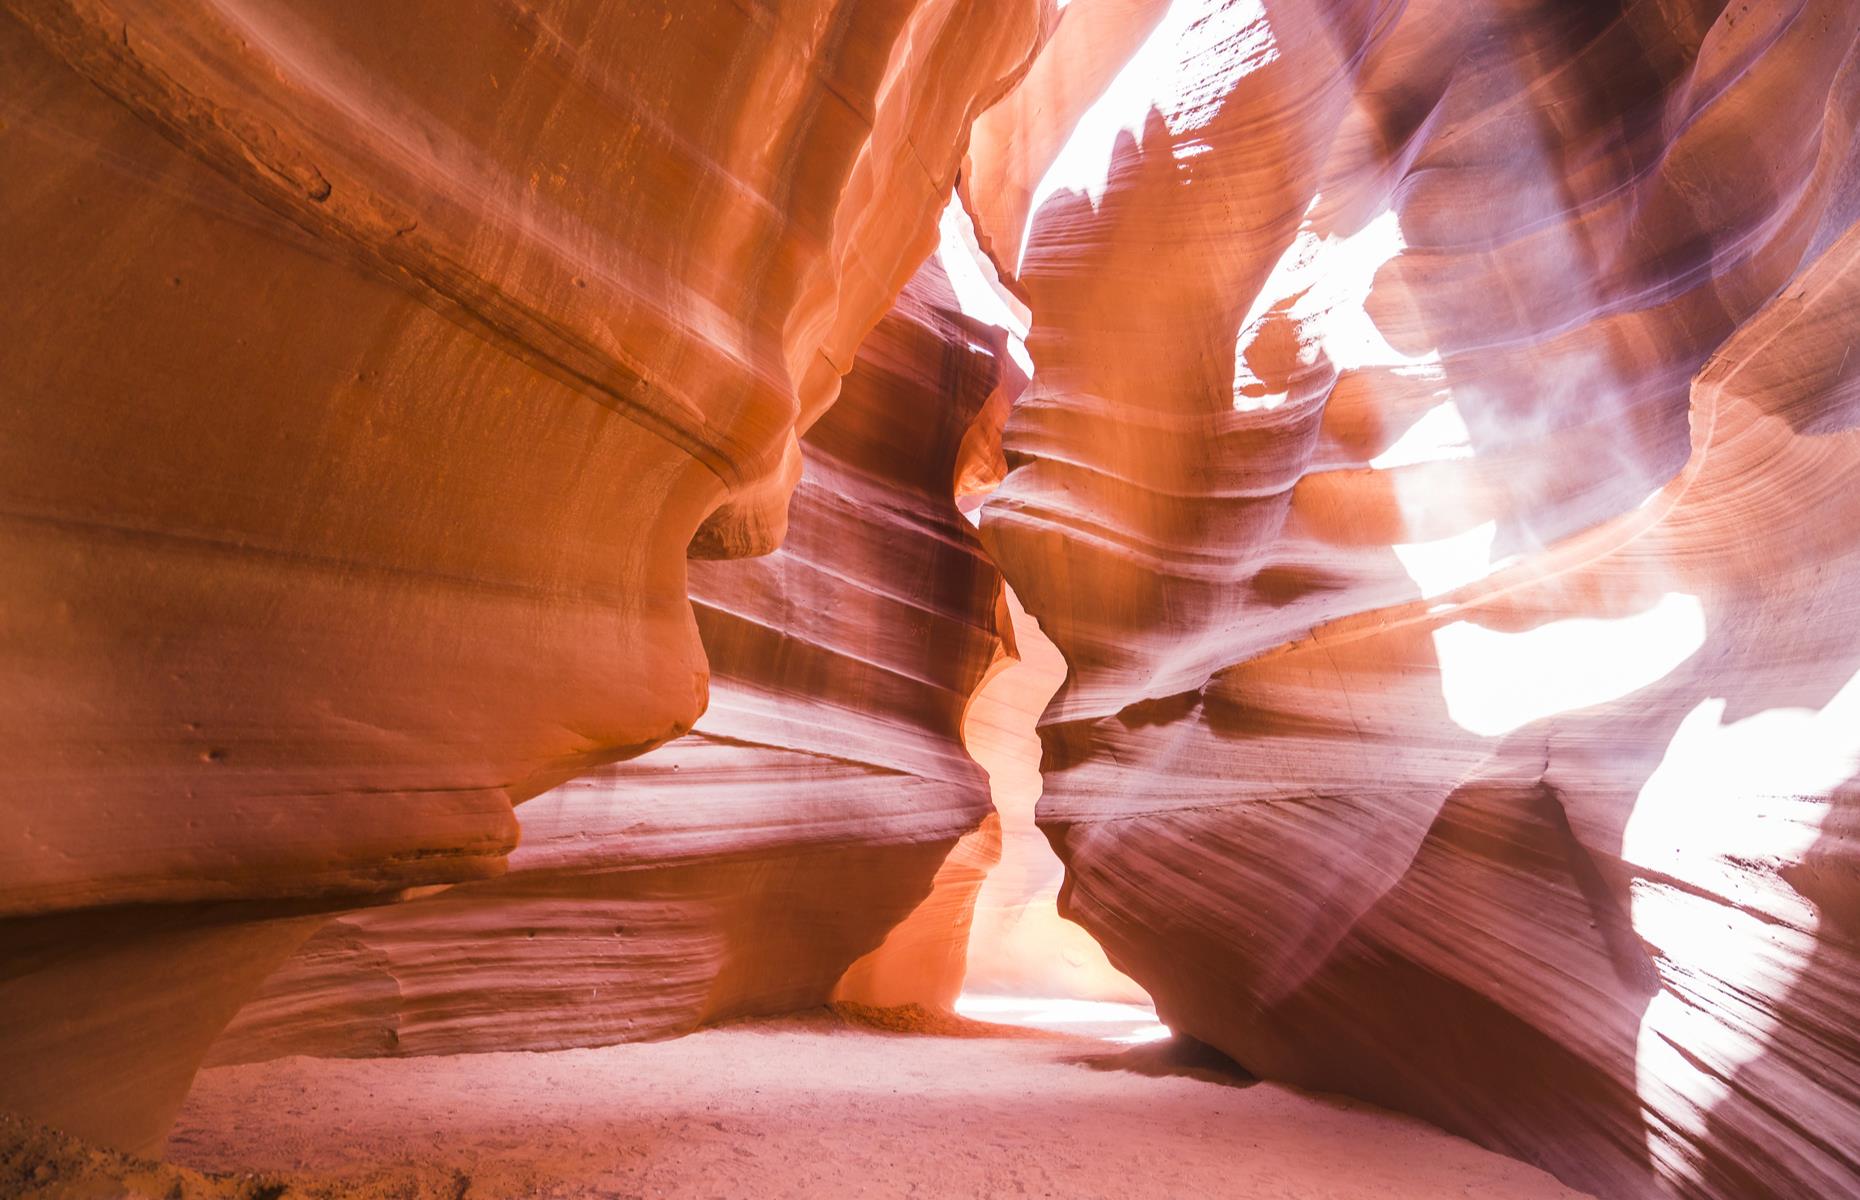 <p>With its rolling waves of vibrant red rock, Antelope Canyon looks like it could belong on Mars. Eerie beams of daylight beam through from above and cast shadows on the dusty canyon floor. The sandstone walls, which tower up to 100-feet (30.5m) high, have been sculpted into their wave-like shapes by the wind over millions of years. Usually the canyon can only be visited on a guided tour as it's located within the Navajo Nation but access is <a href="https://antelopecanyon.az/">currently closed</a> due to COVID-19. Check out these <a href="https://www.loveexploring.com/galleries/92037/stunning-images-of-the-worlds-most-incredible-canyons">stunning images of the world's most beautiful canyons</a>.</p>